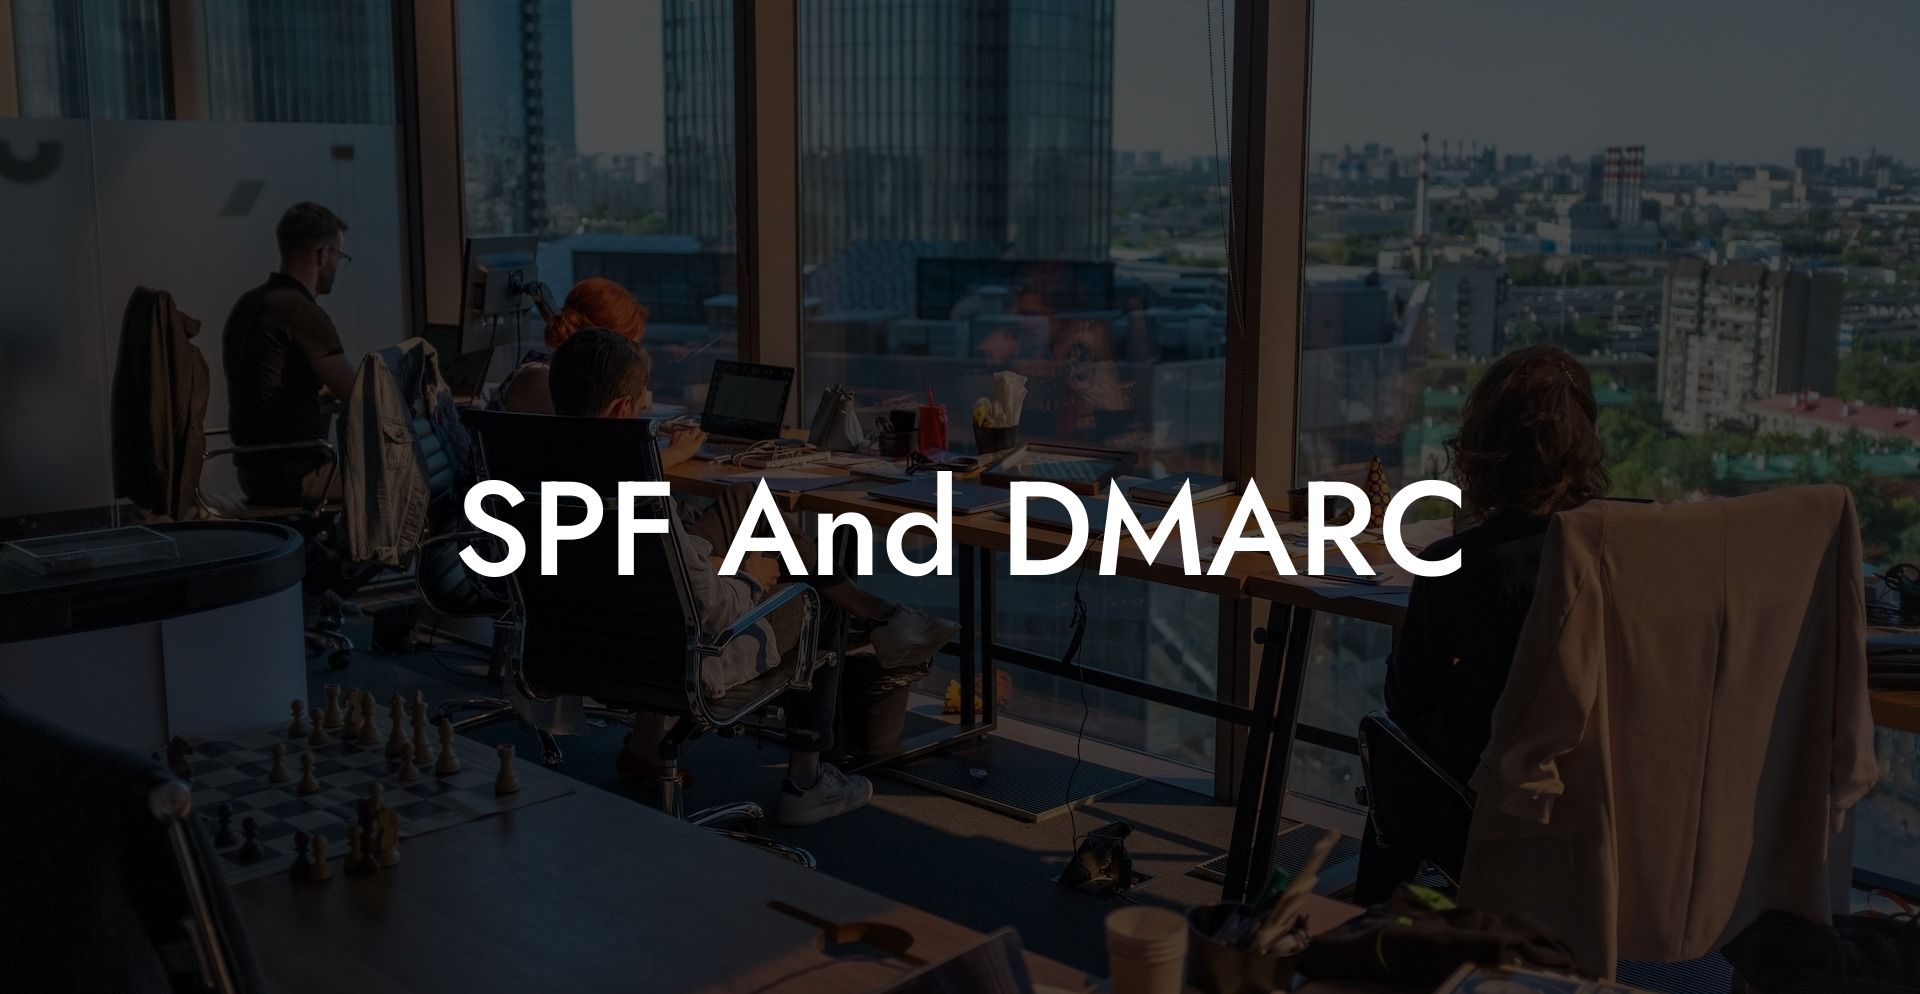 SPF And DMARC